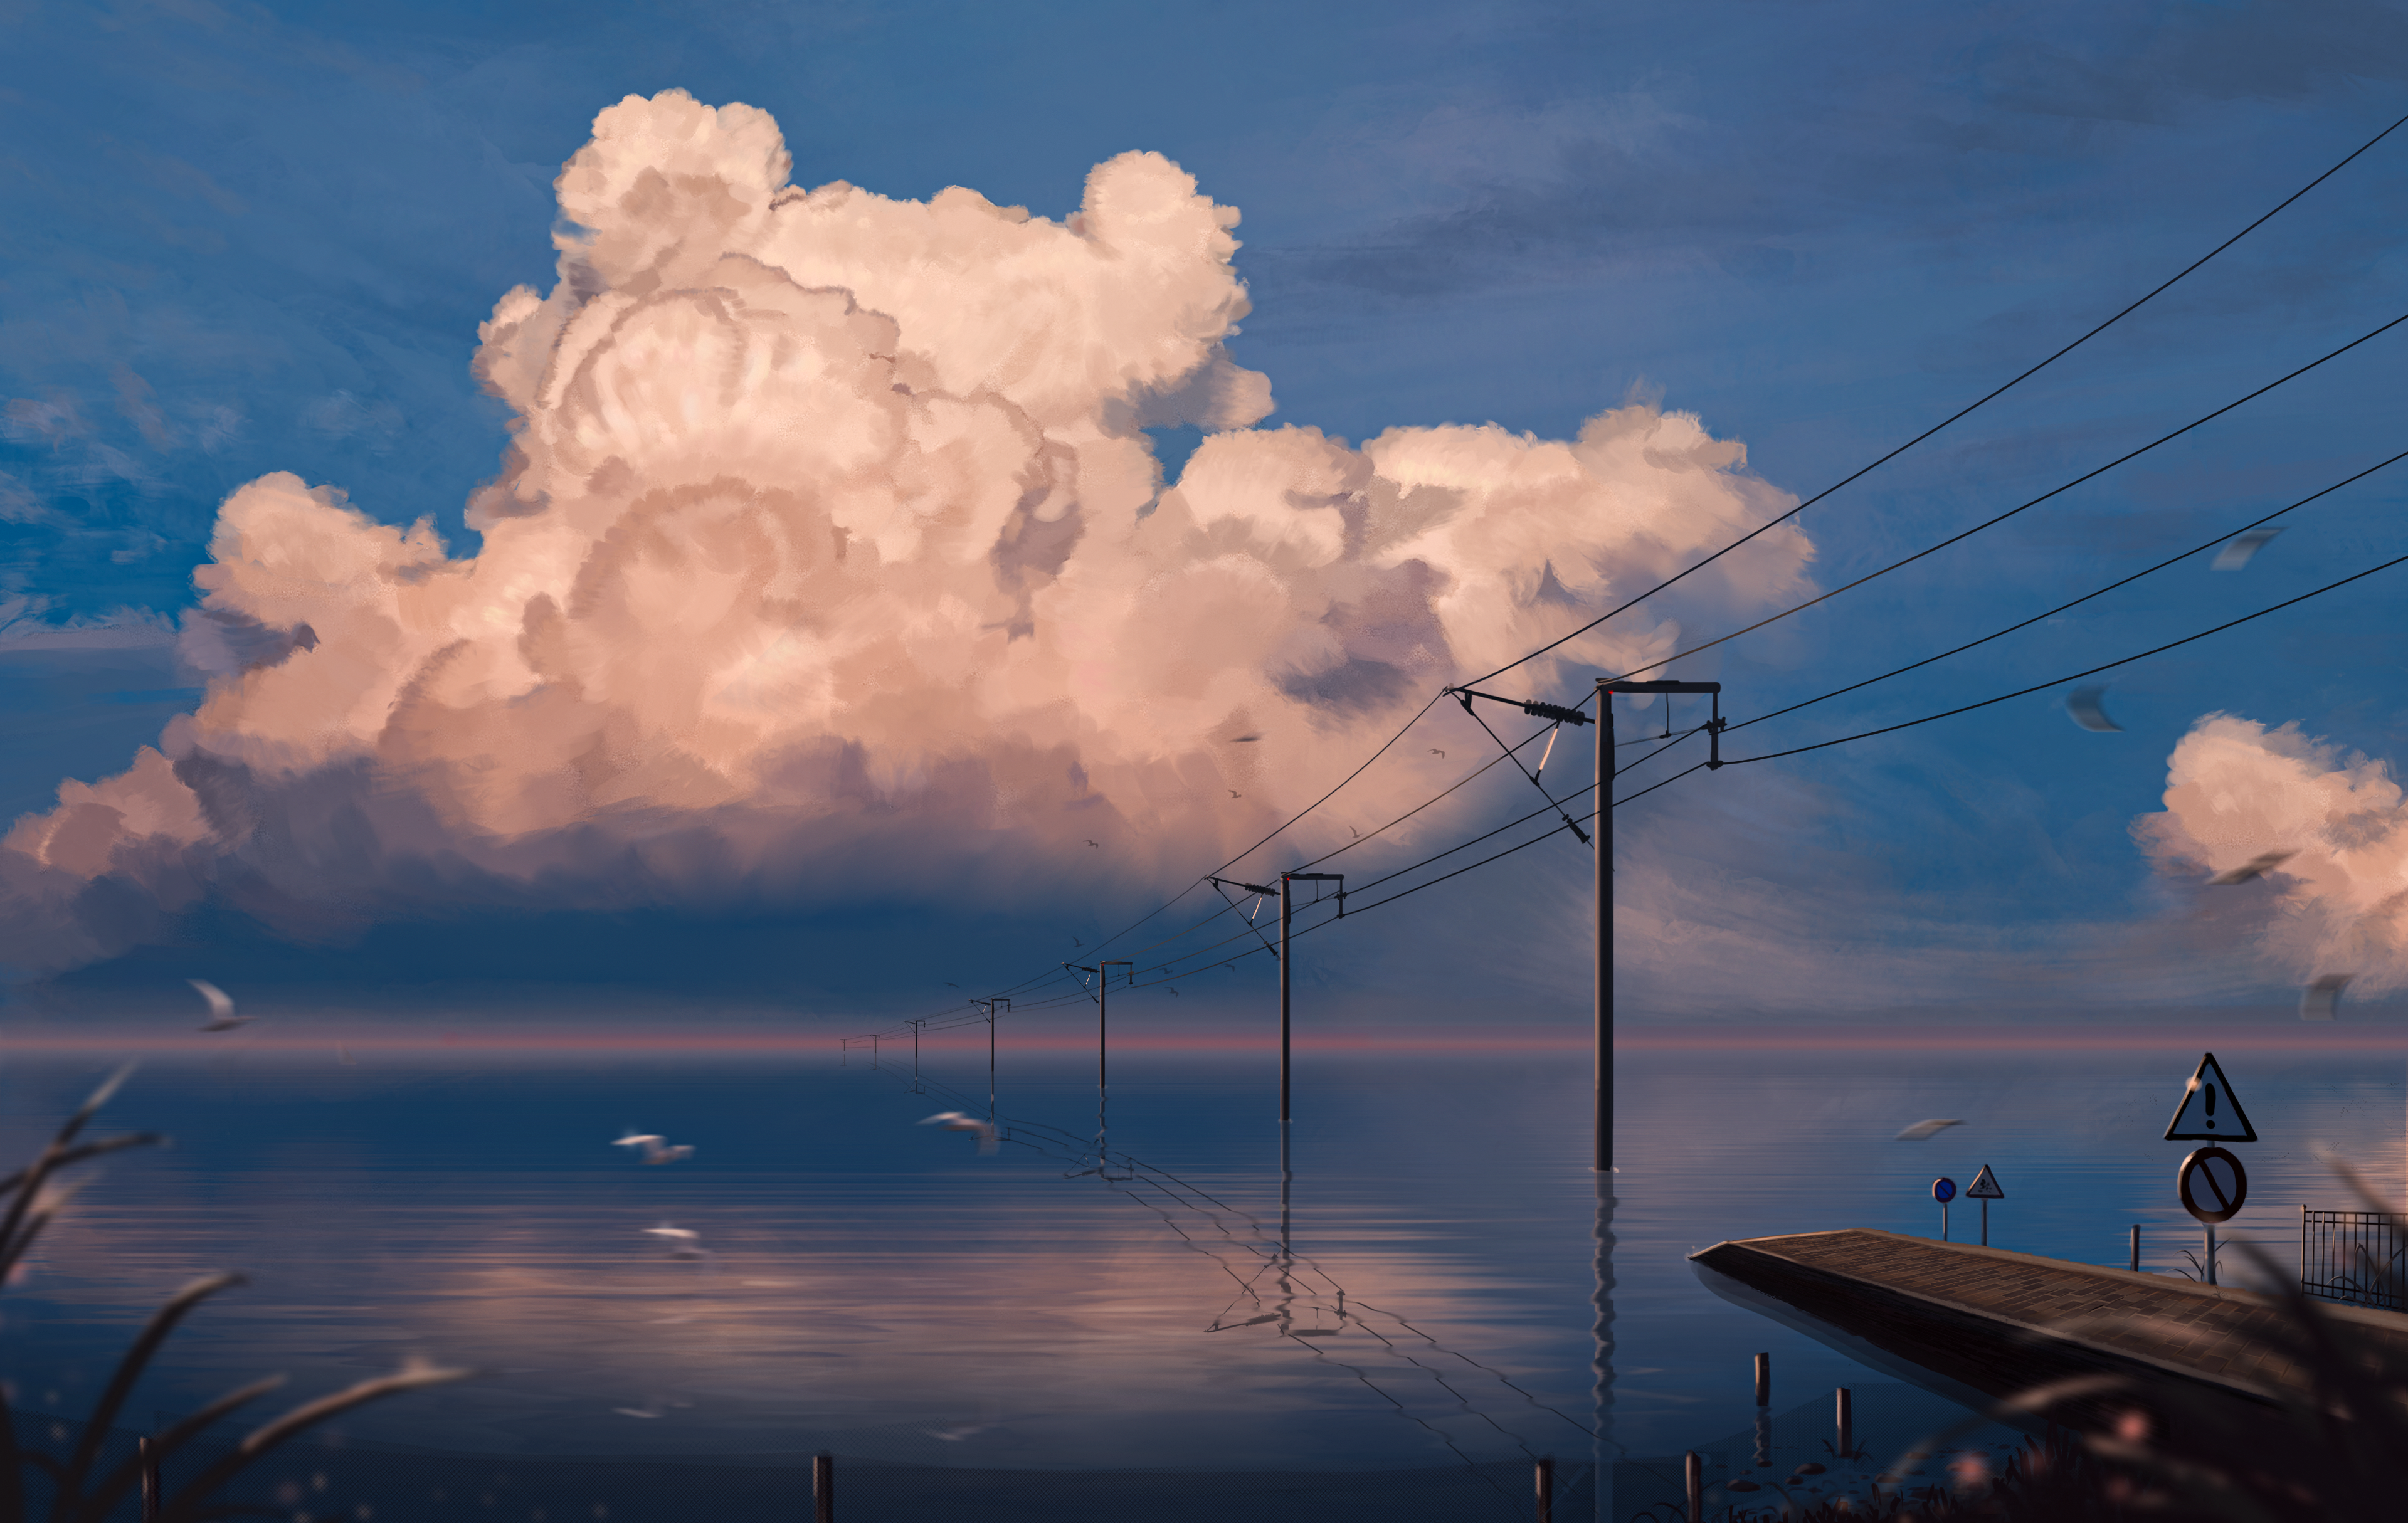 Anime 3840x2429 anime clouds outdoors power lines signs water sky Yu jing digital art